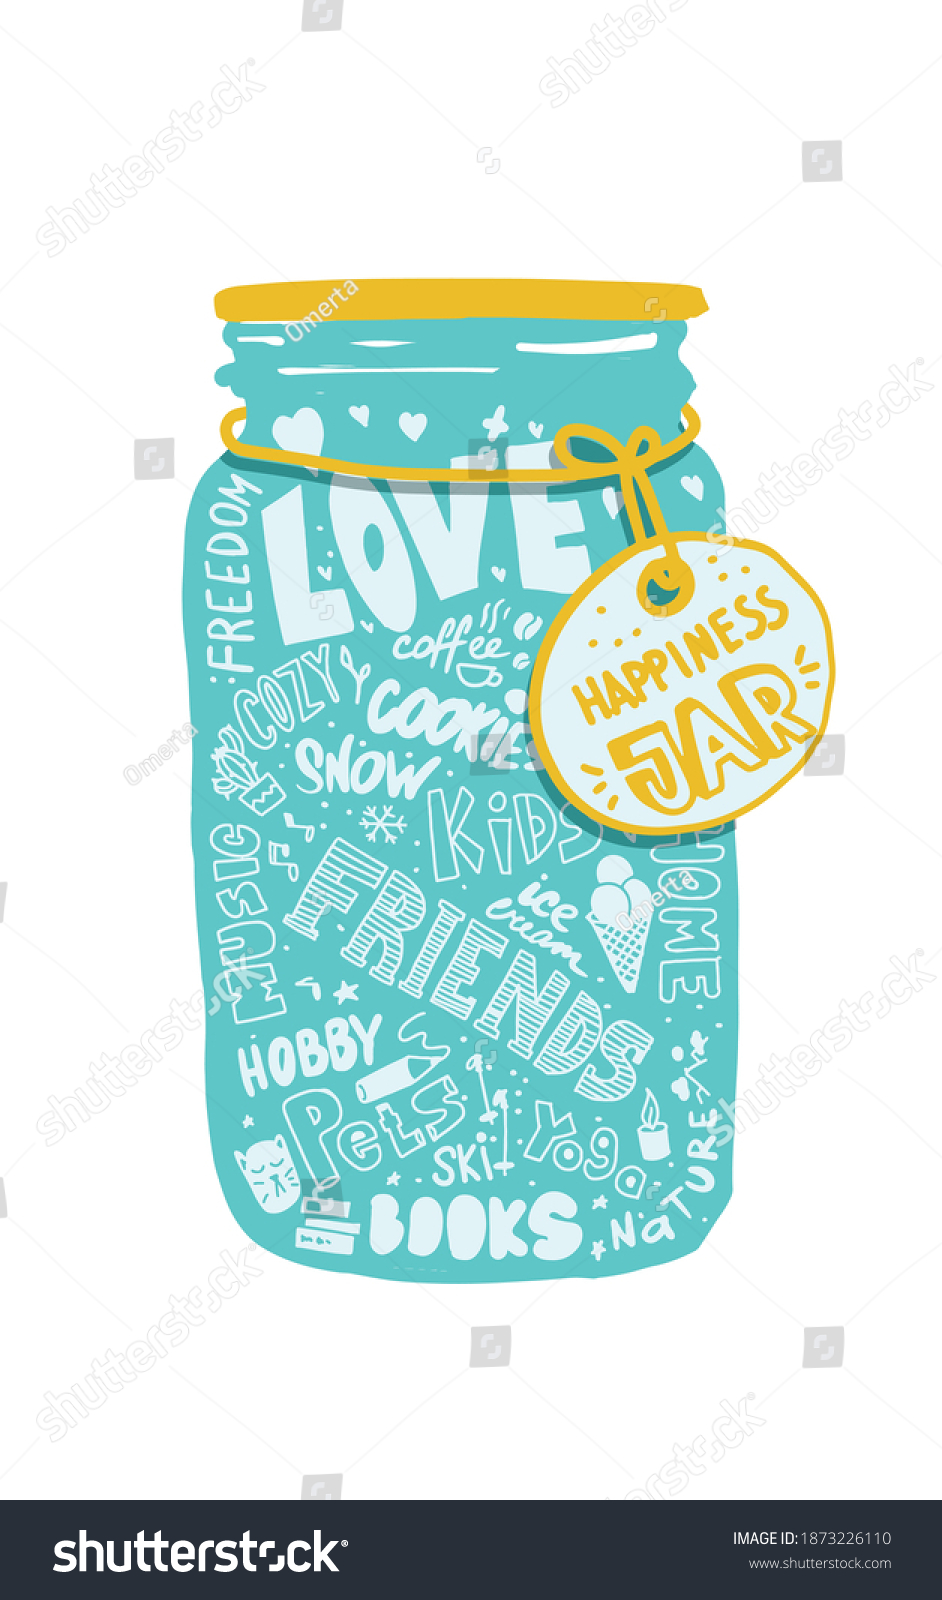 Of happiness jar LET'S TALK